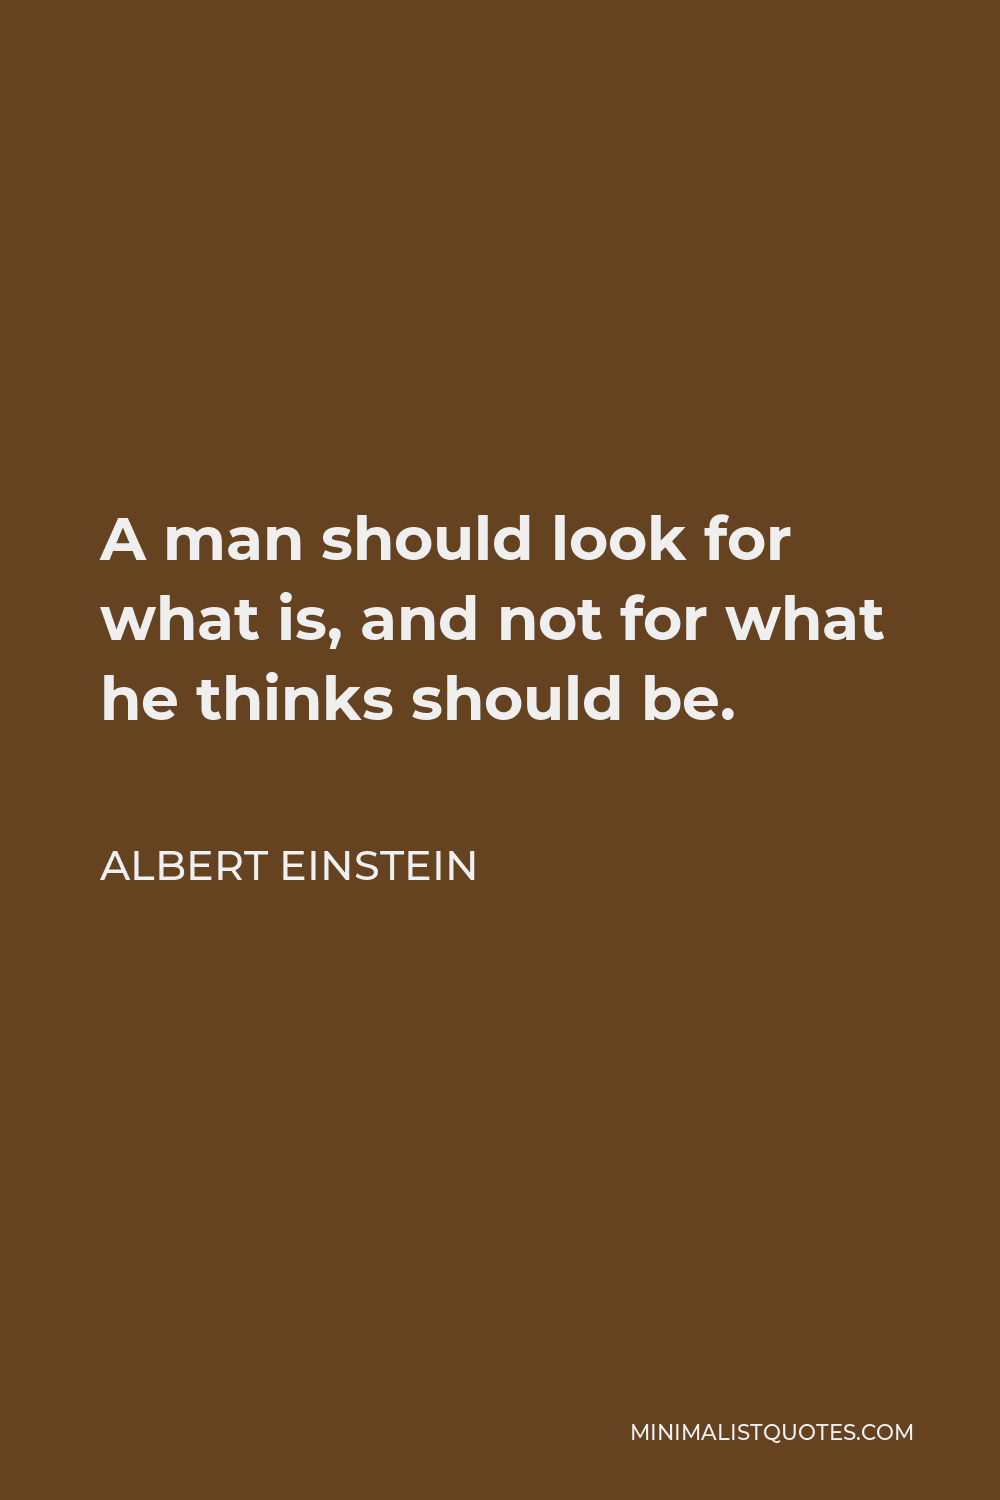 Albert Einstein Quote - A man should look for what is, and not for what he thinks should be.